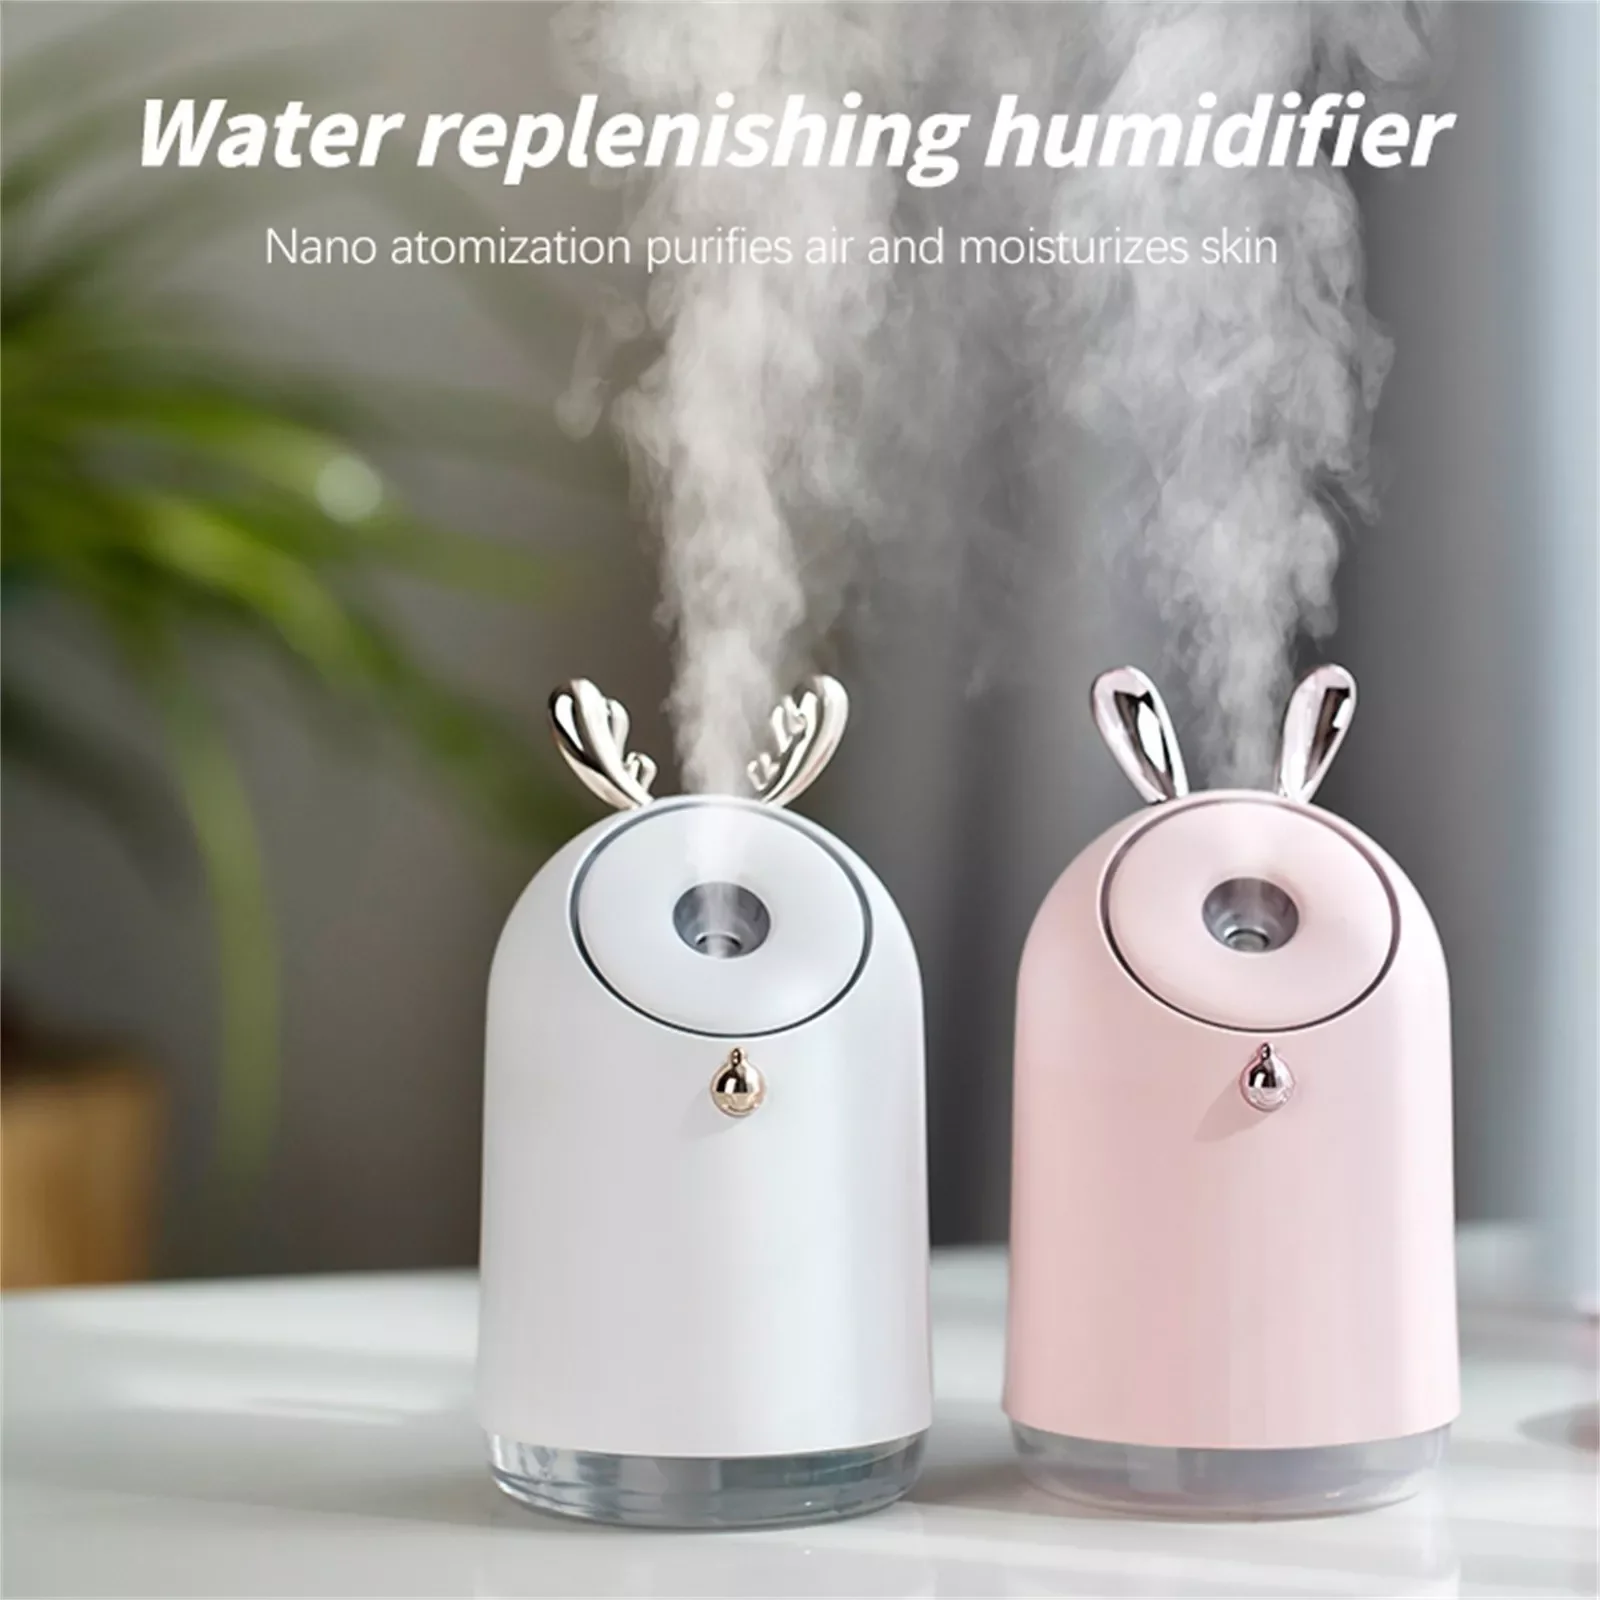 Humidifier Home Bedroom Small Mini Air Aromatherapy Purification Sprayer Water Replenishing Instrument Usb Air Conditioning#dg4